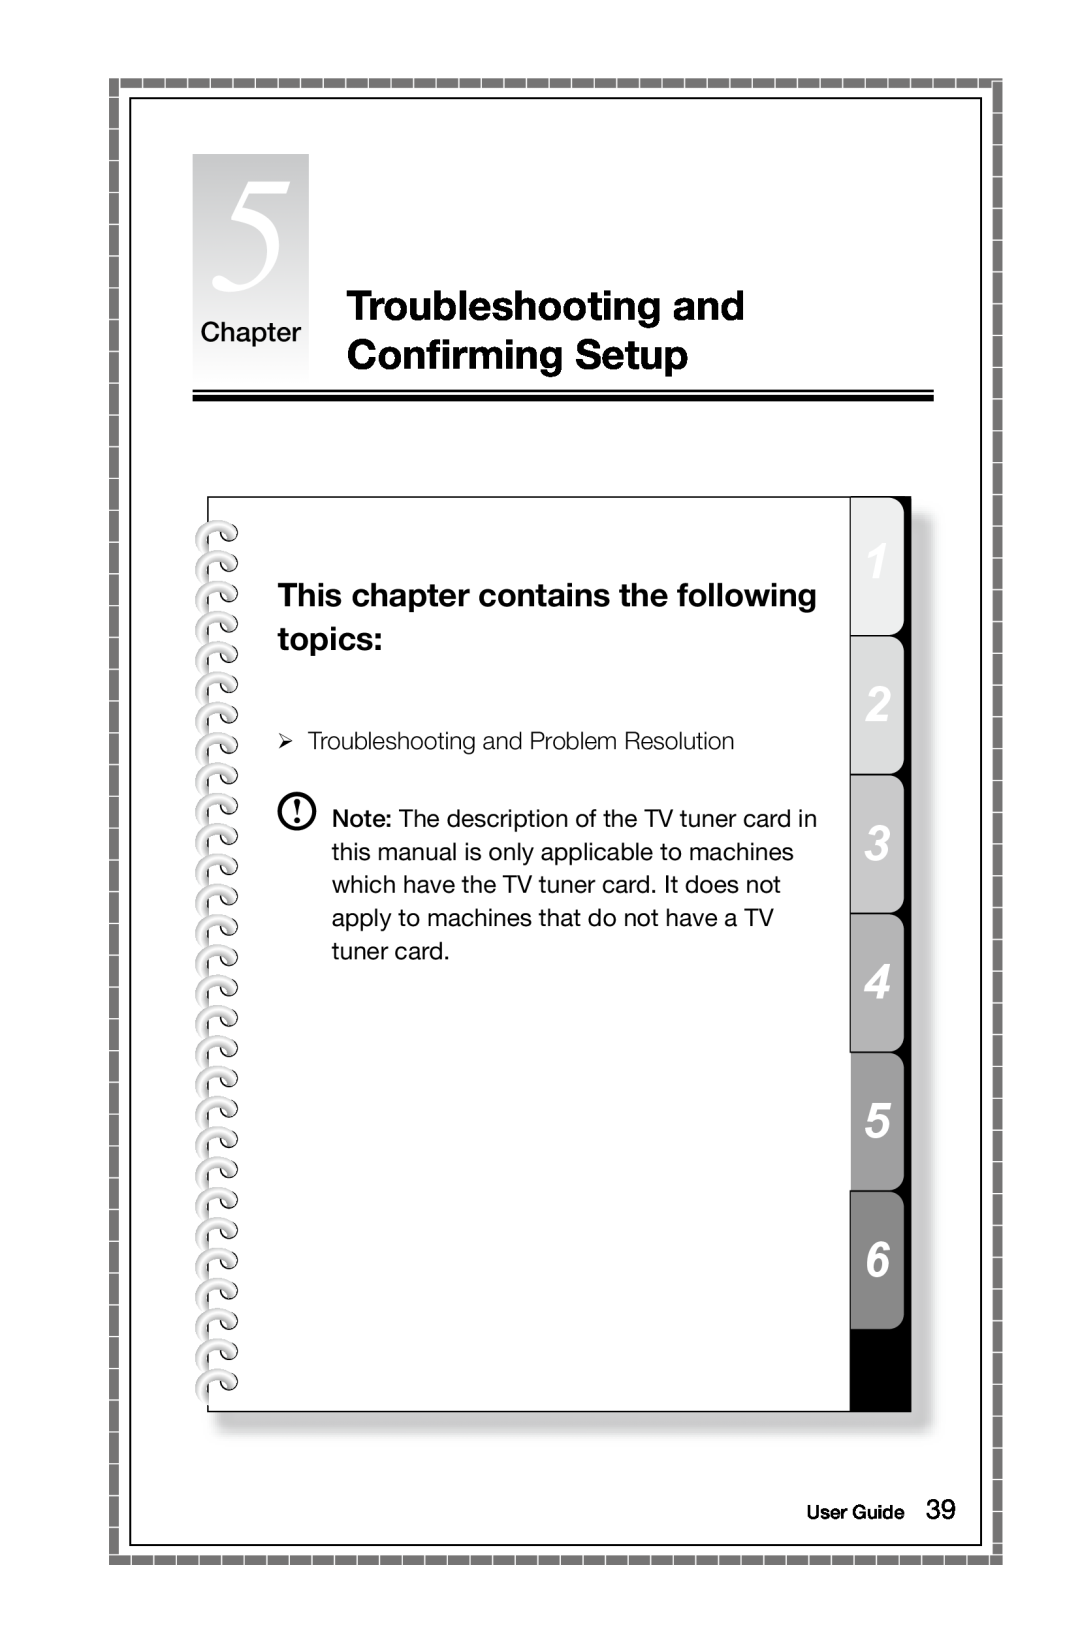 Lenovo 3363 [B540p] 10098, 97 Troubleshooting and Chapter Confirming Setup, This chapter contains the following topics 